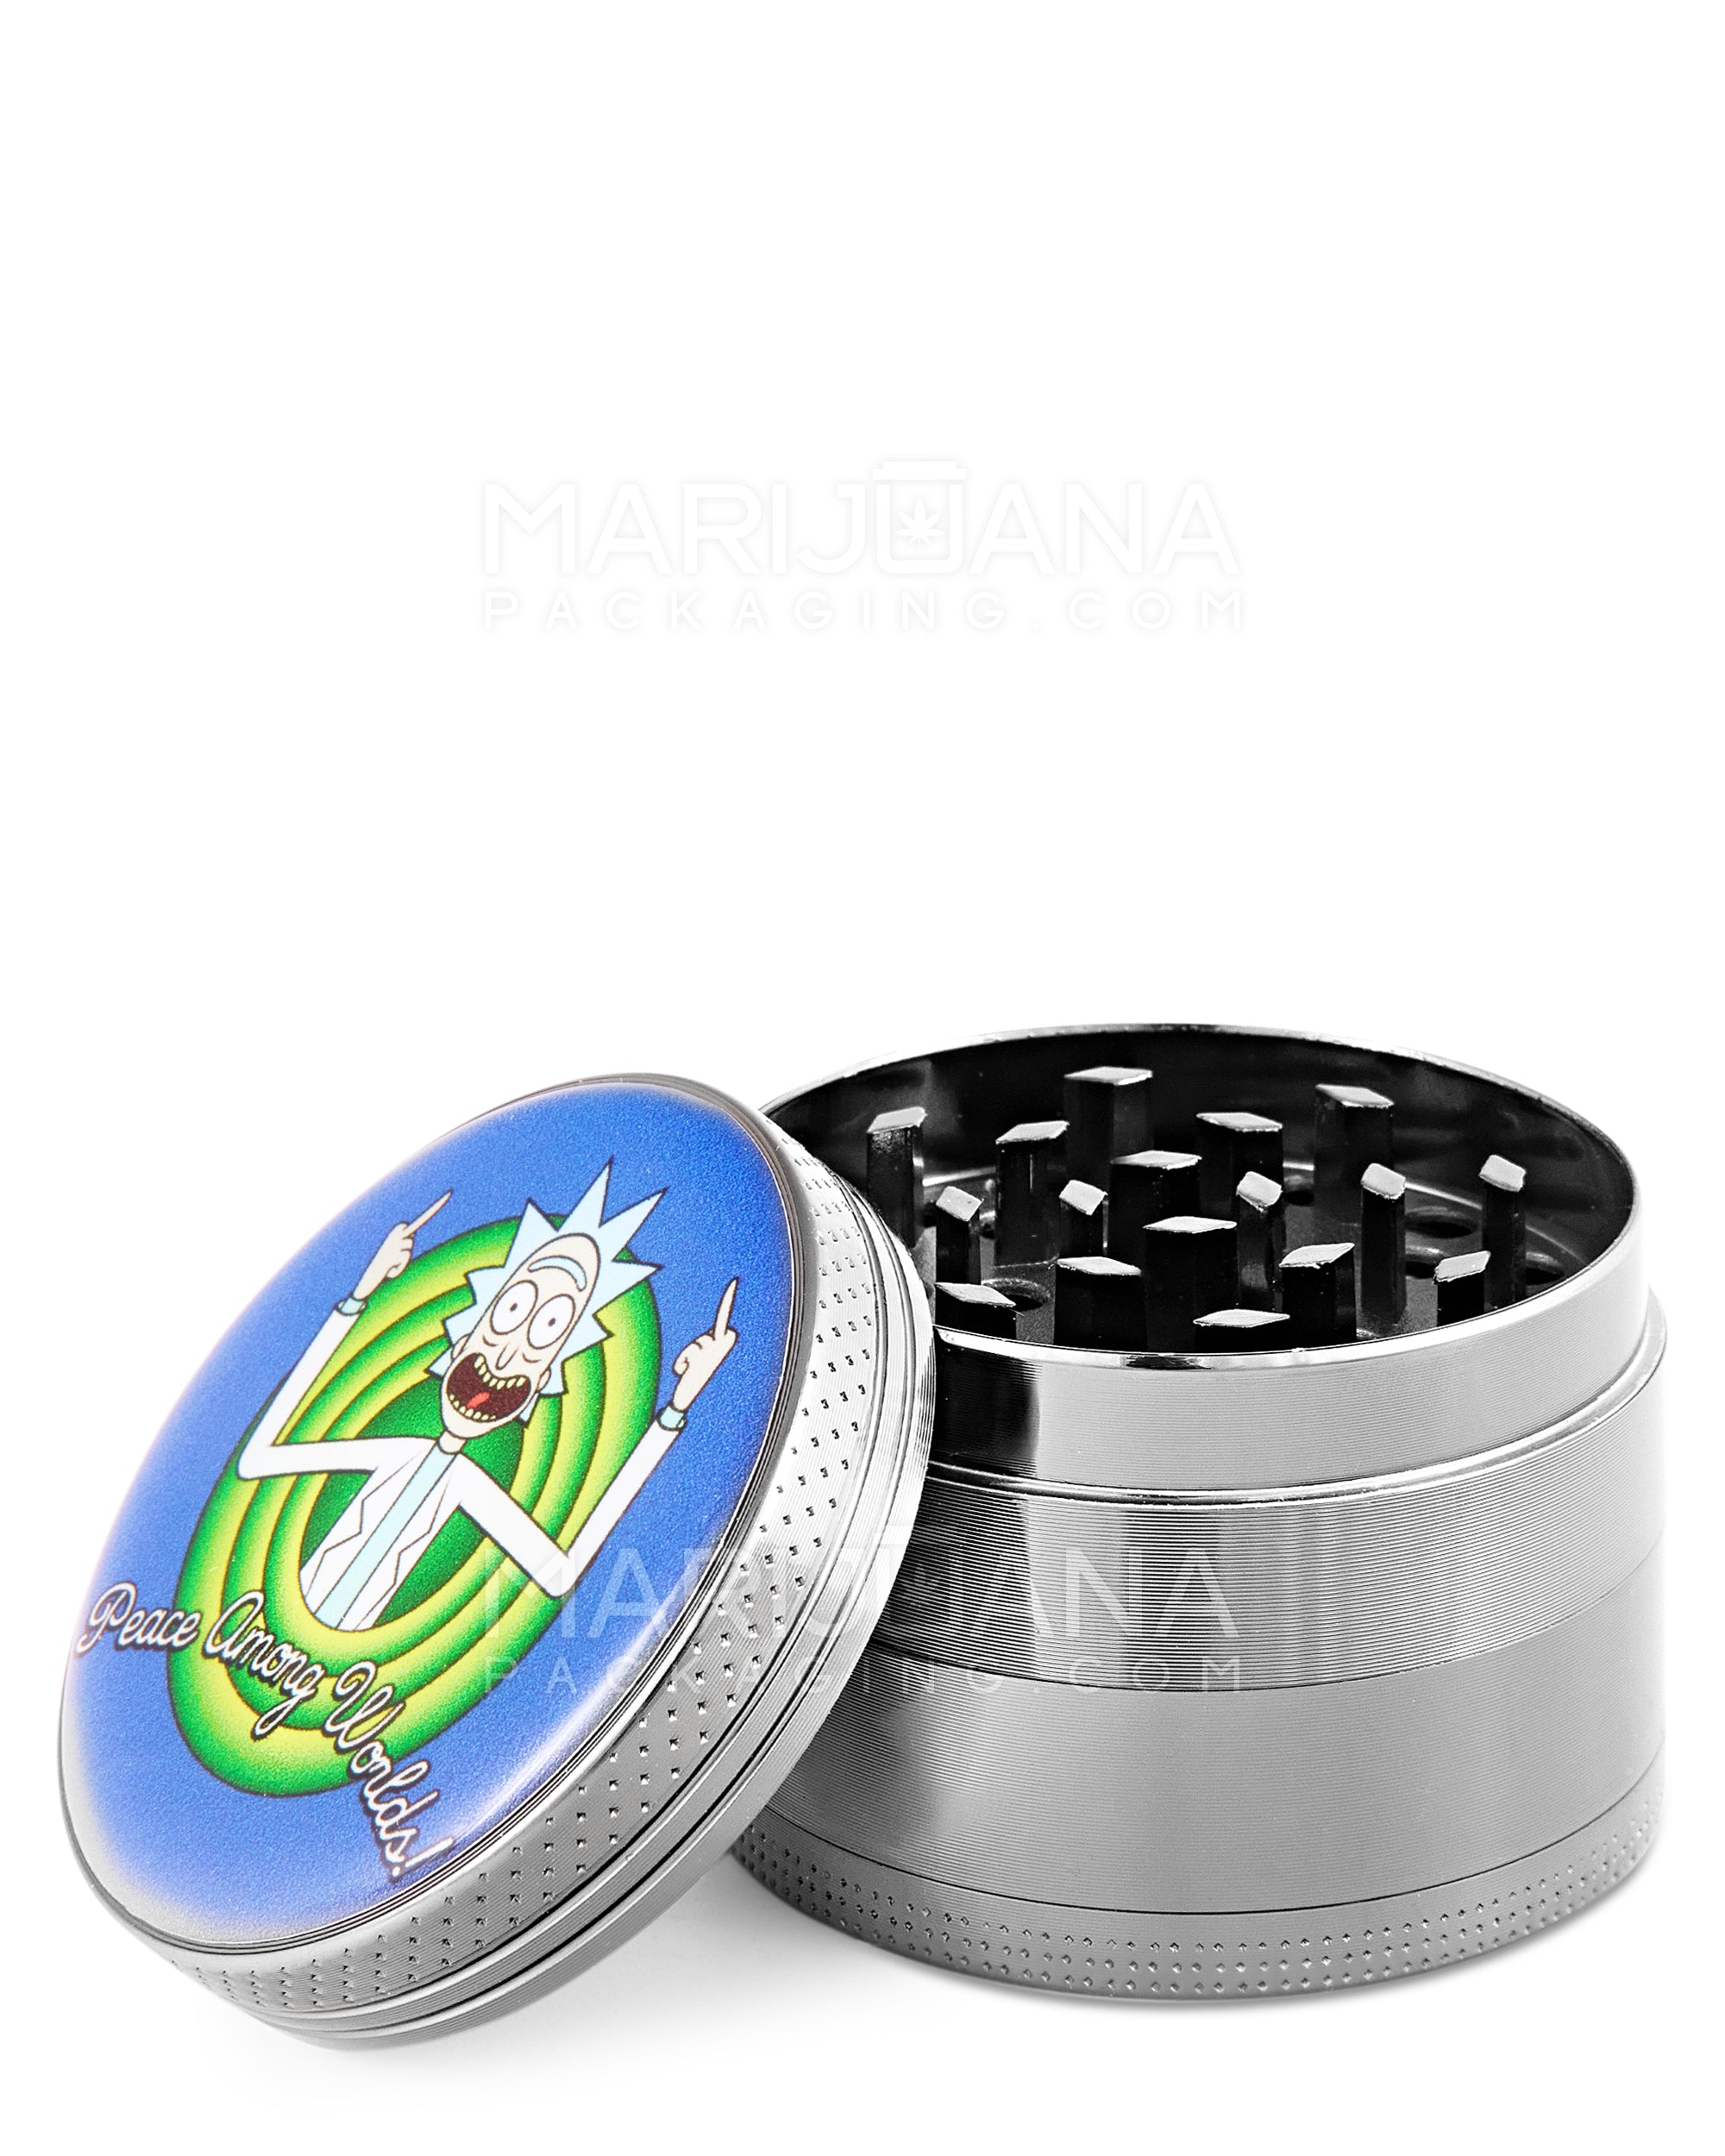 R&M Decal Magnetic Metal Grinder w/ Catcher | 4 Piece - 50mm - Assorted - 9